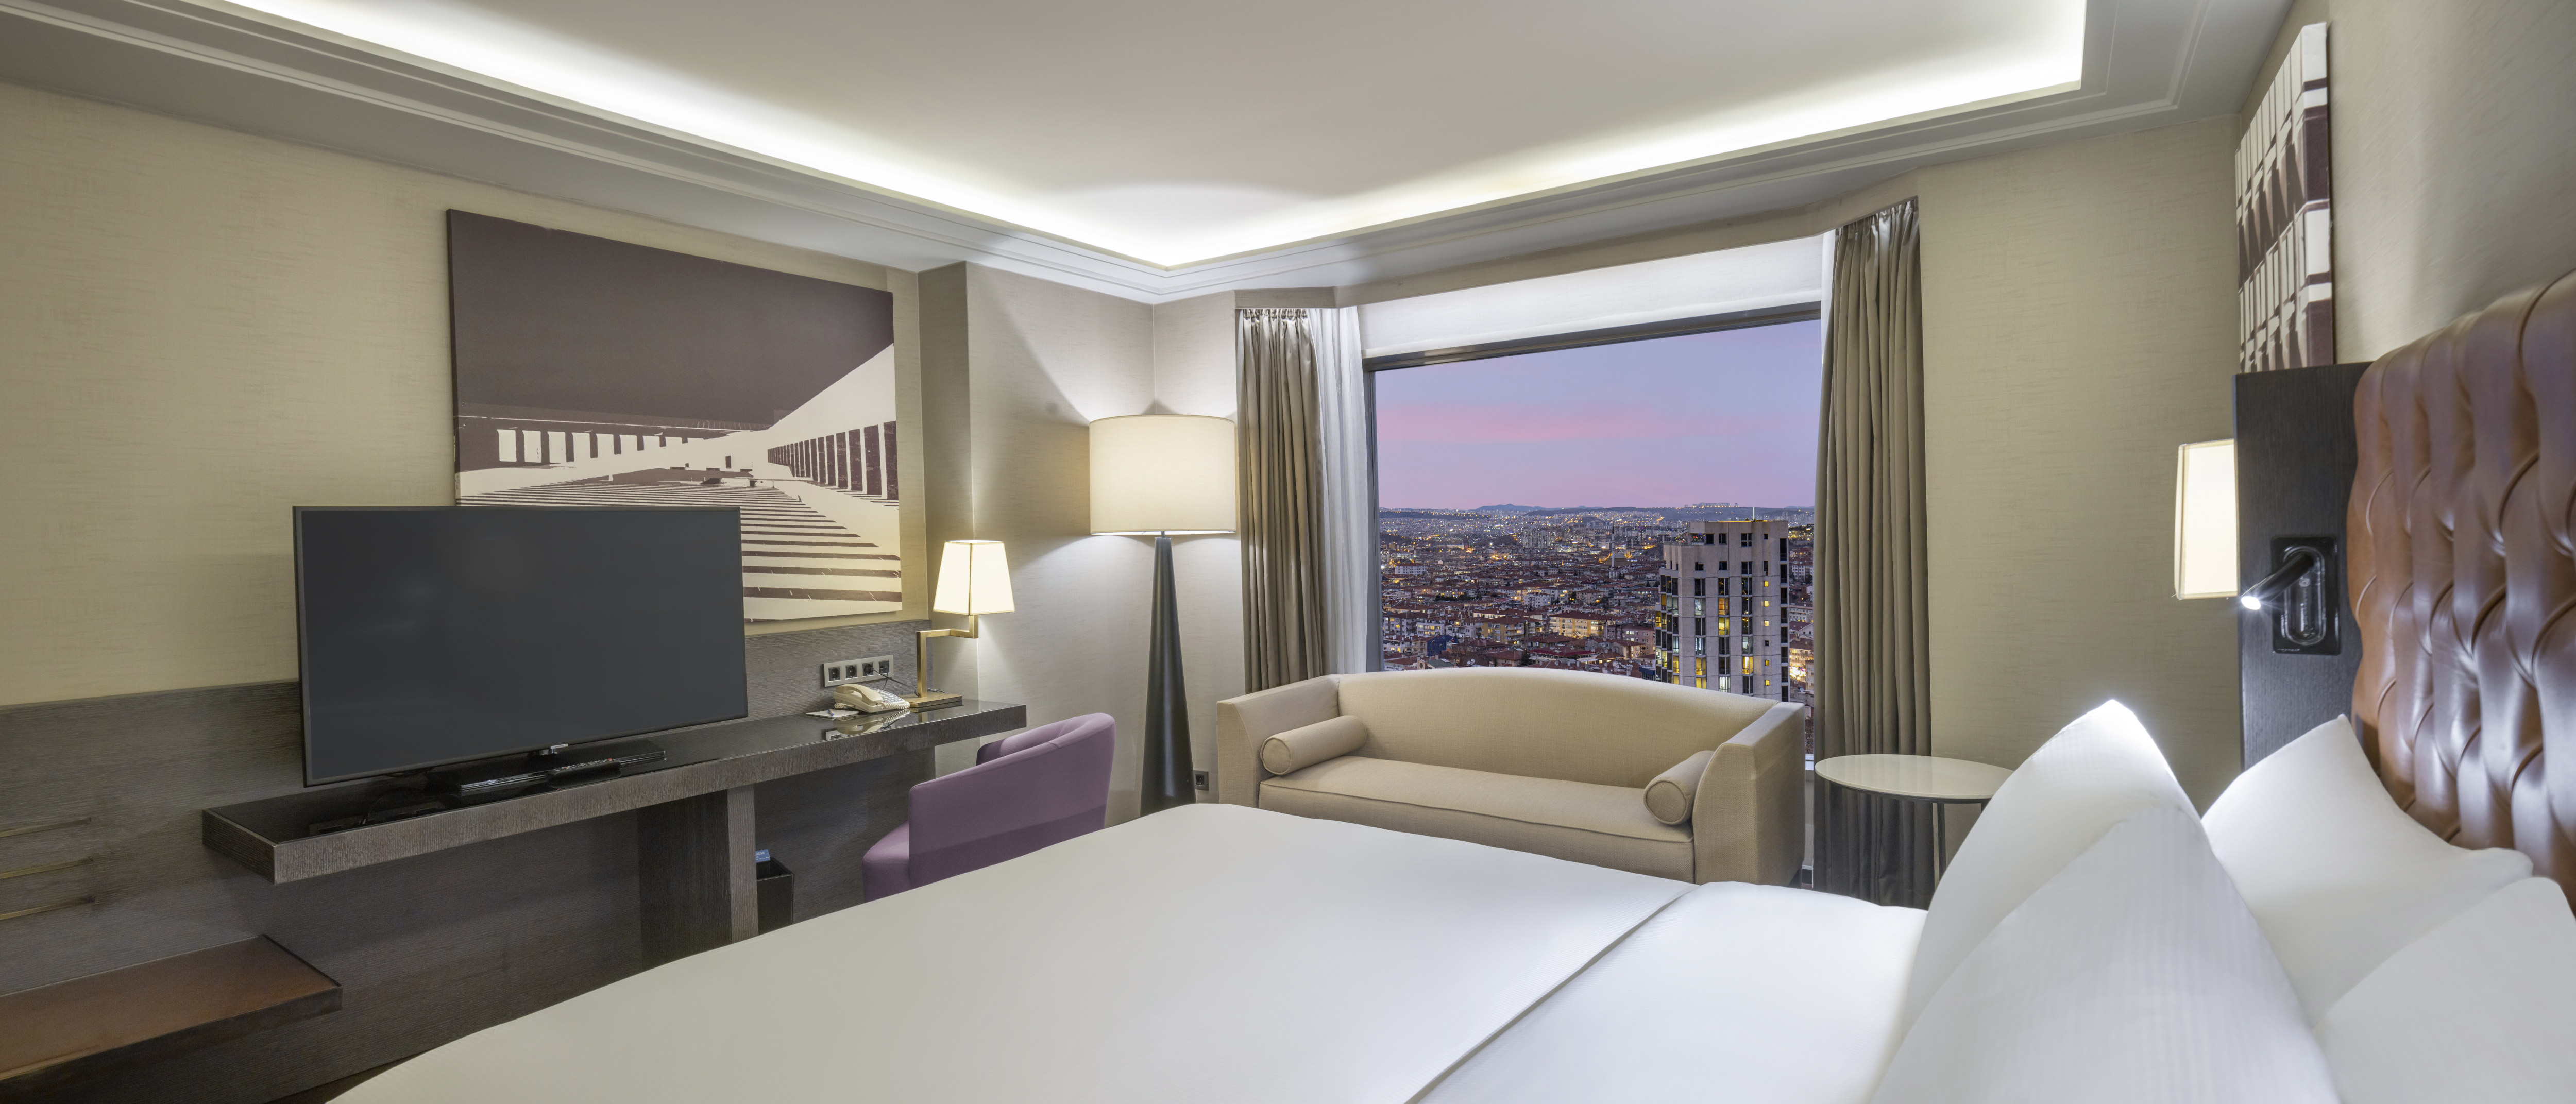 Suite Bedroom with Large Bed HDTV Sofa and City View